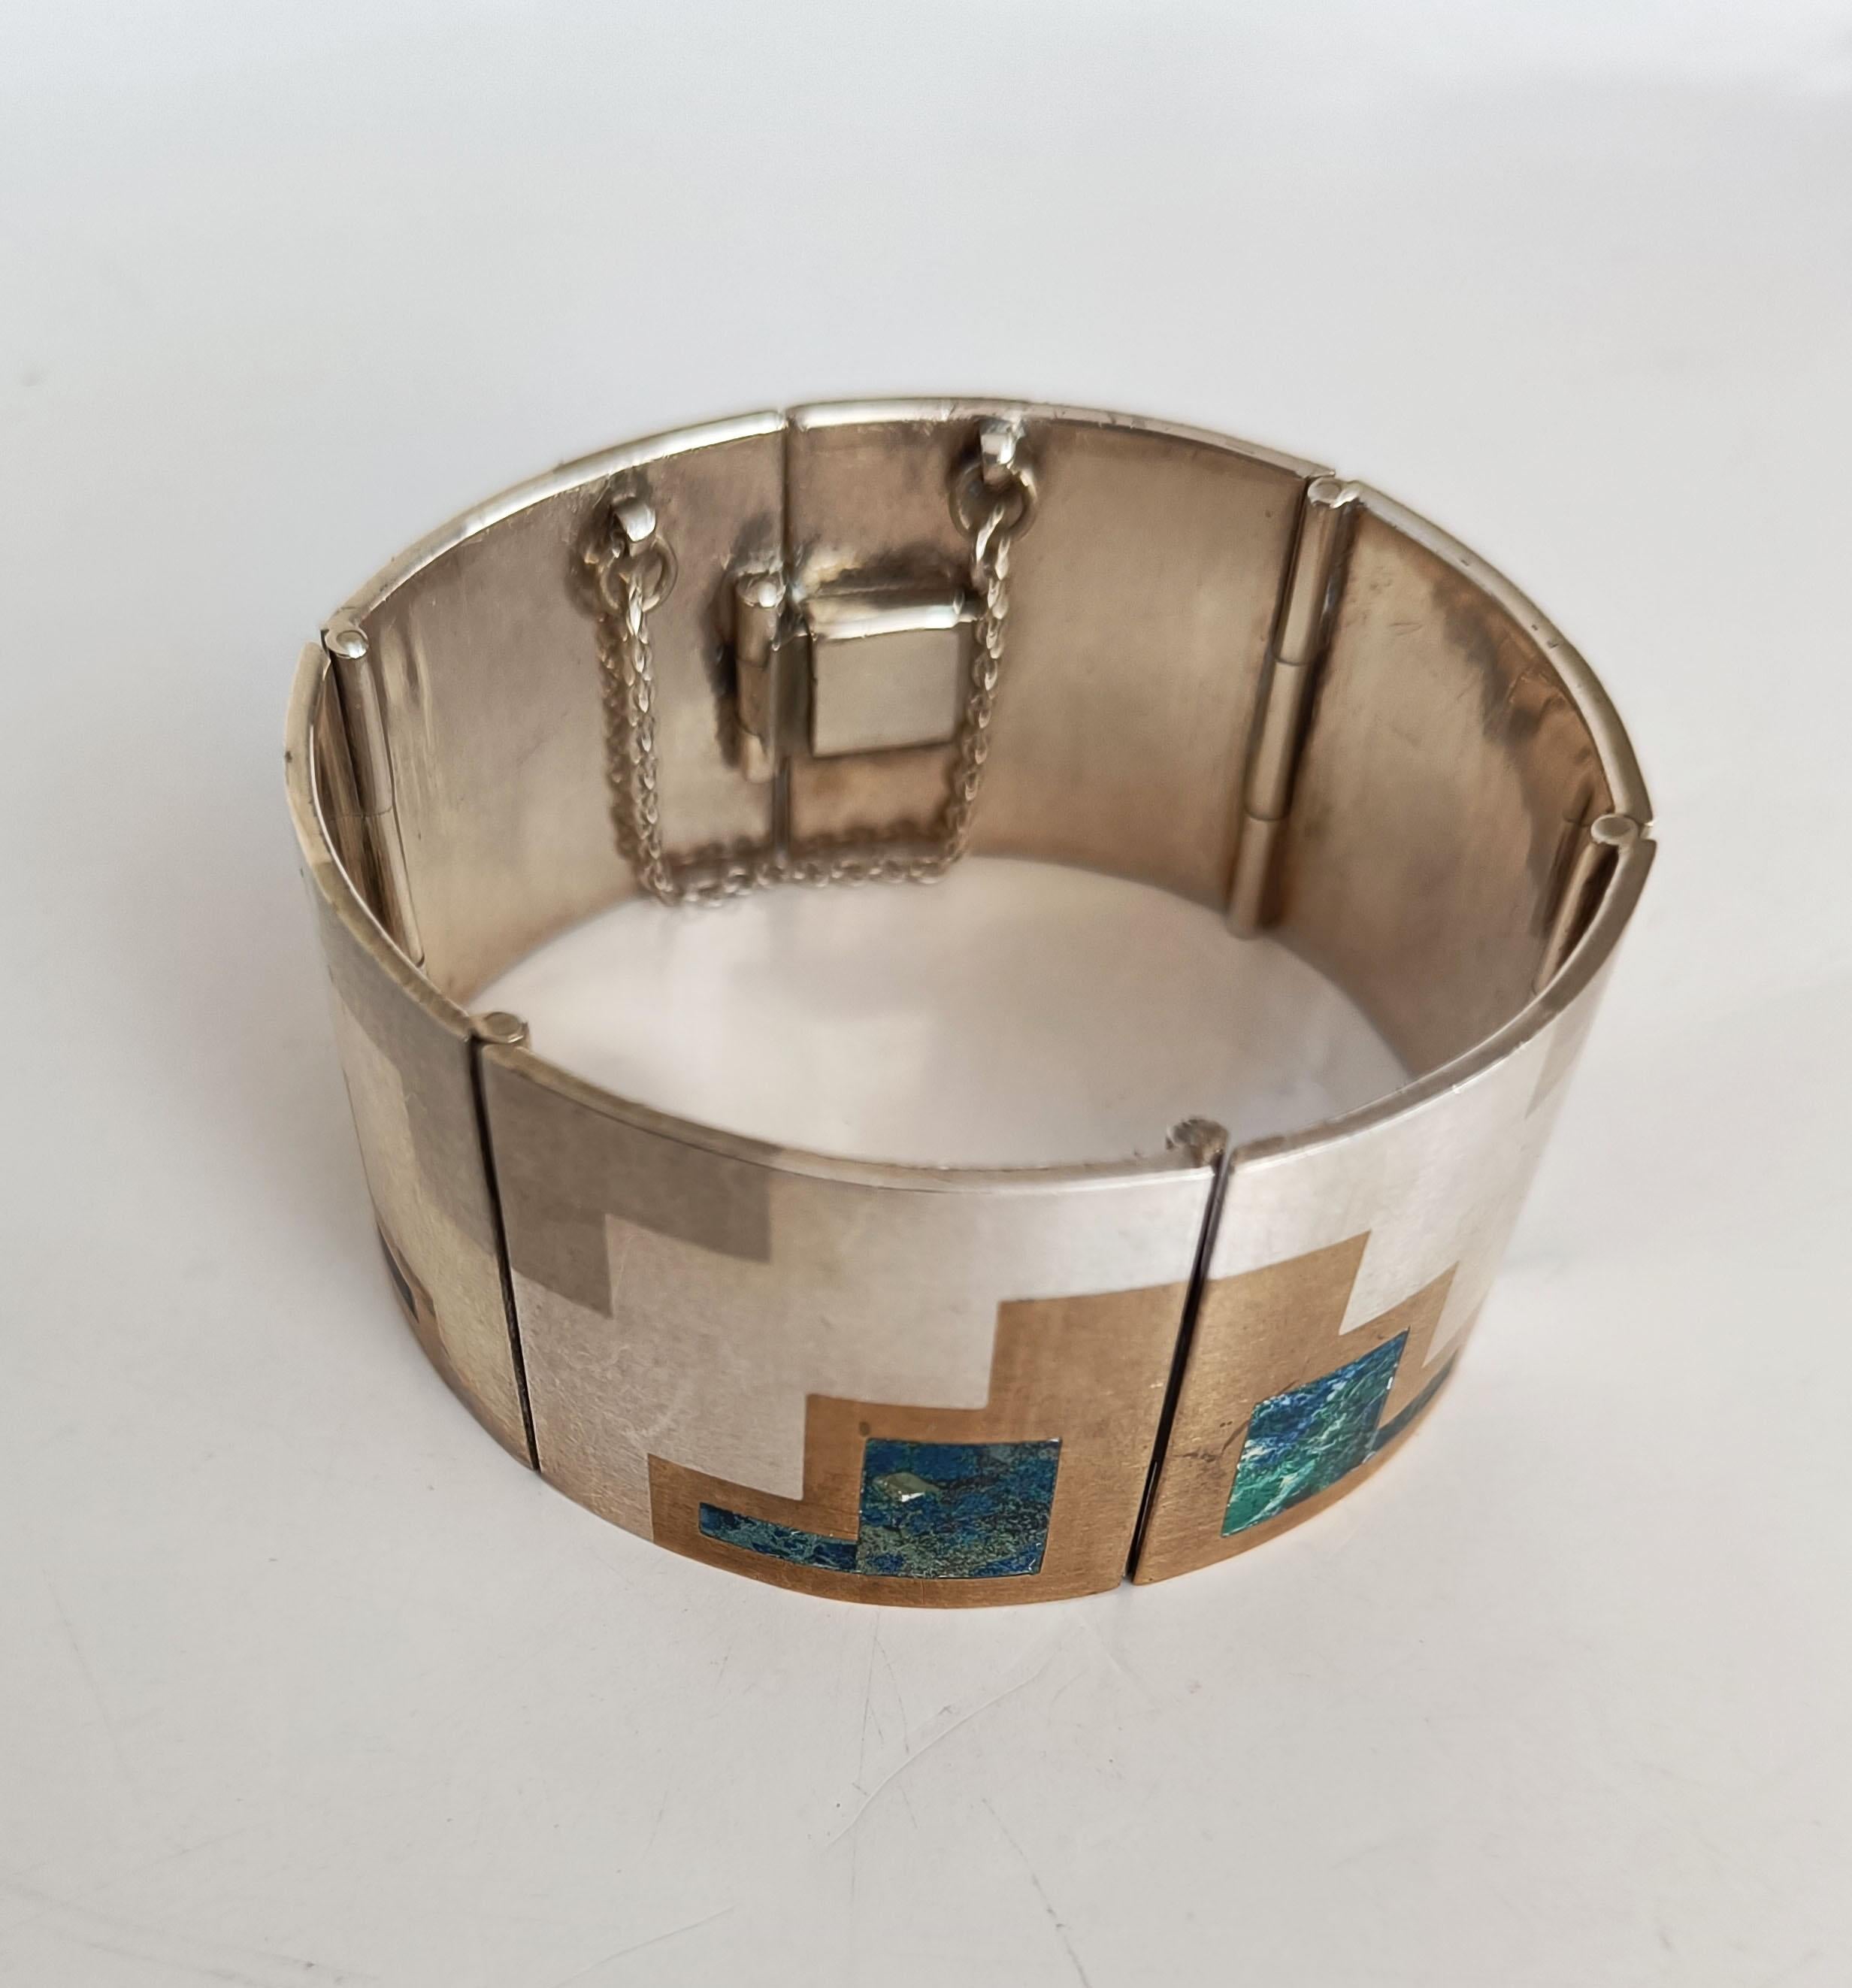 Beautiful Vintage Mexican Taxco silver Modernist design Bracelet with mixed metals and Abalone inlays
Marked  JL Metales 925 sterling mark
1960`s period
Fine condition.